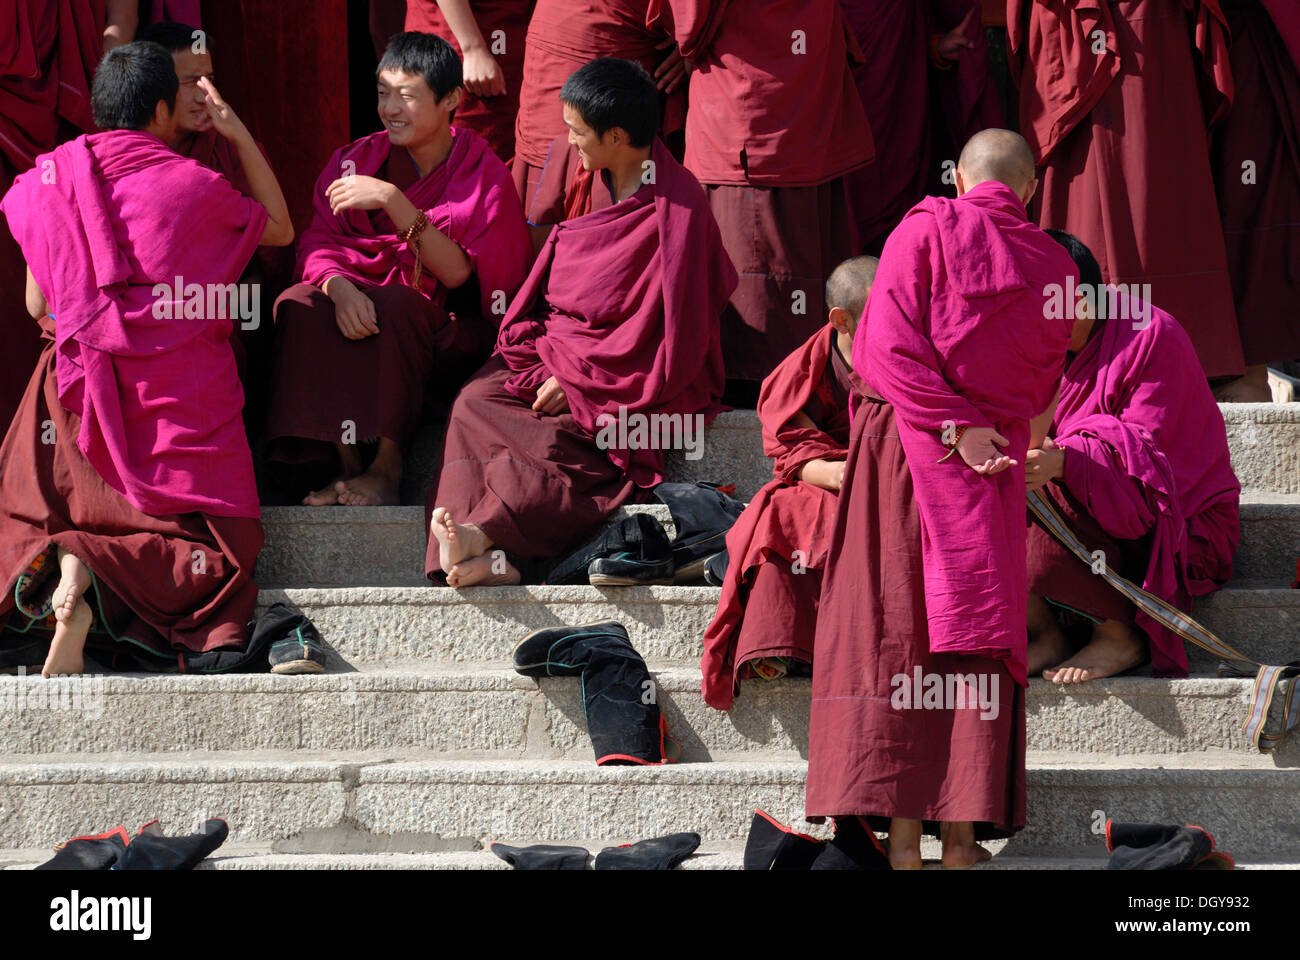 Tibetan monks in monk's robes on the steps in front of the assembly hall or Dukhang, Labrang Monastery, Xiahe, Gansu, China Stock Photo